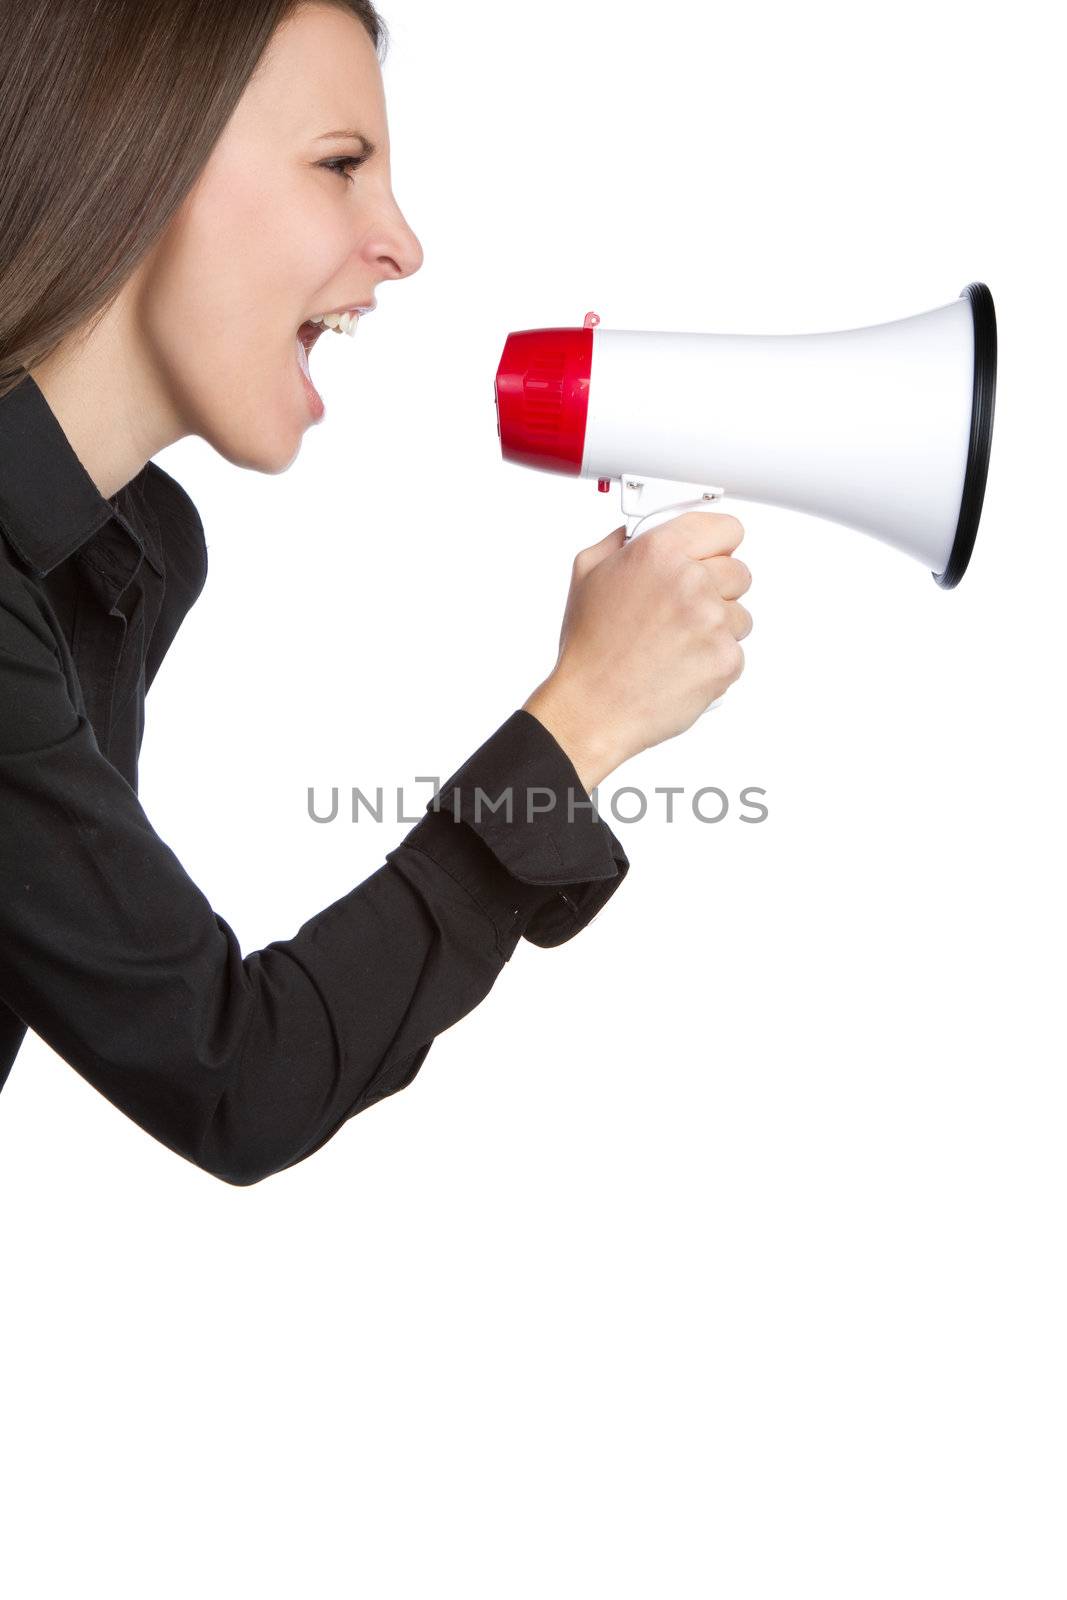 Young woman yelling into megaphone